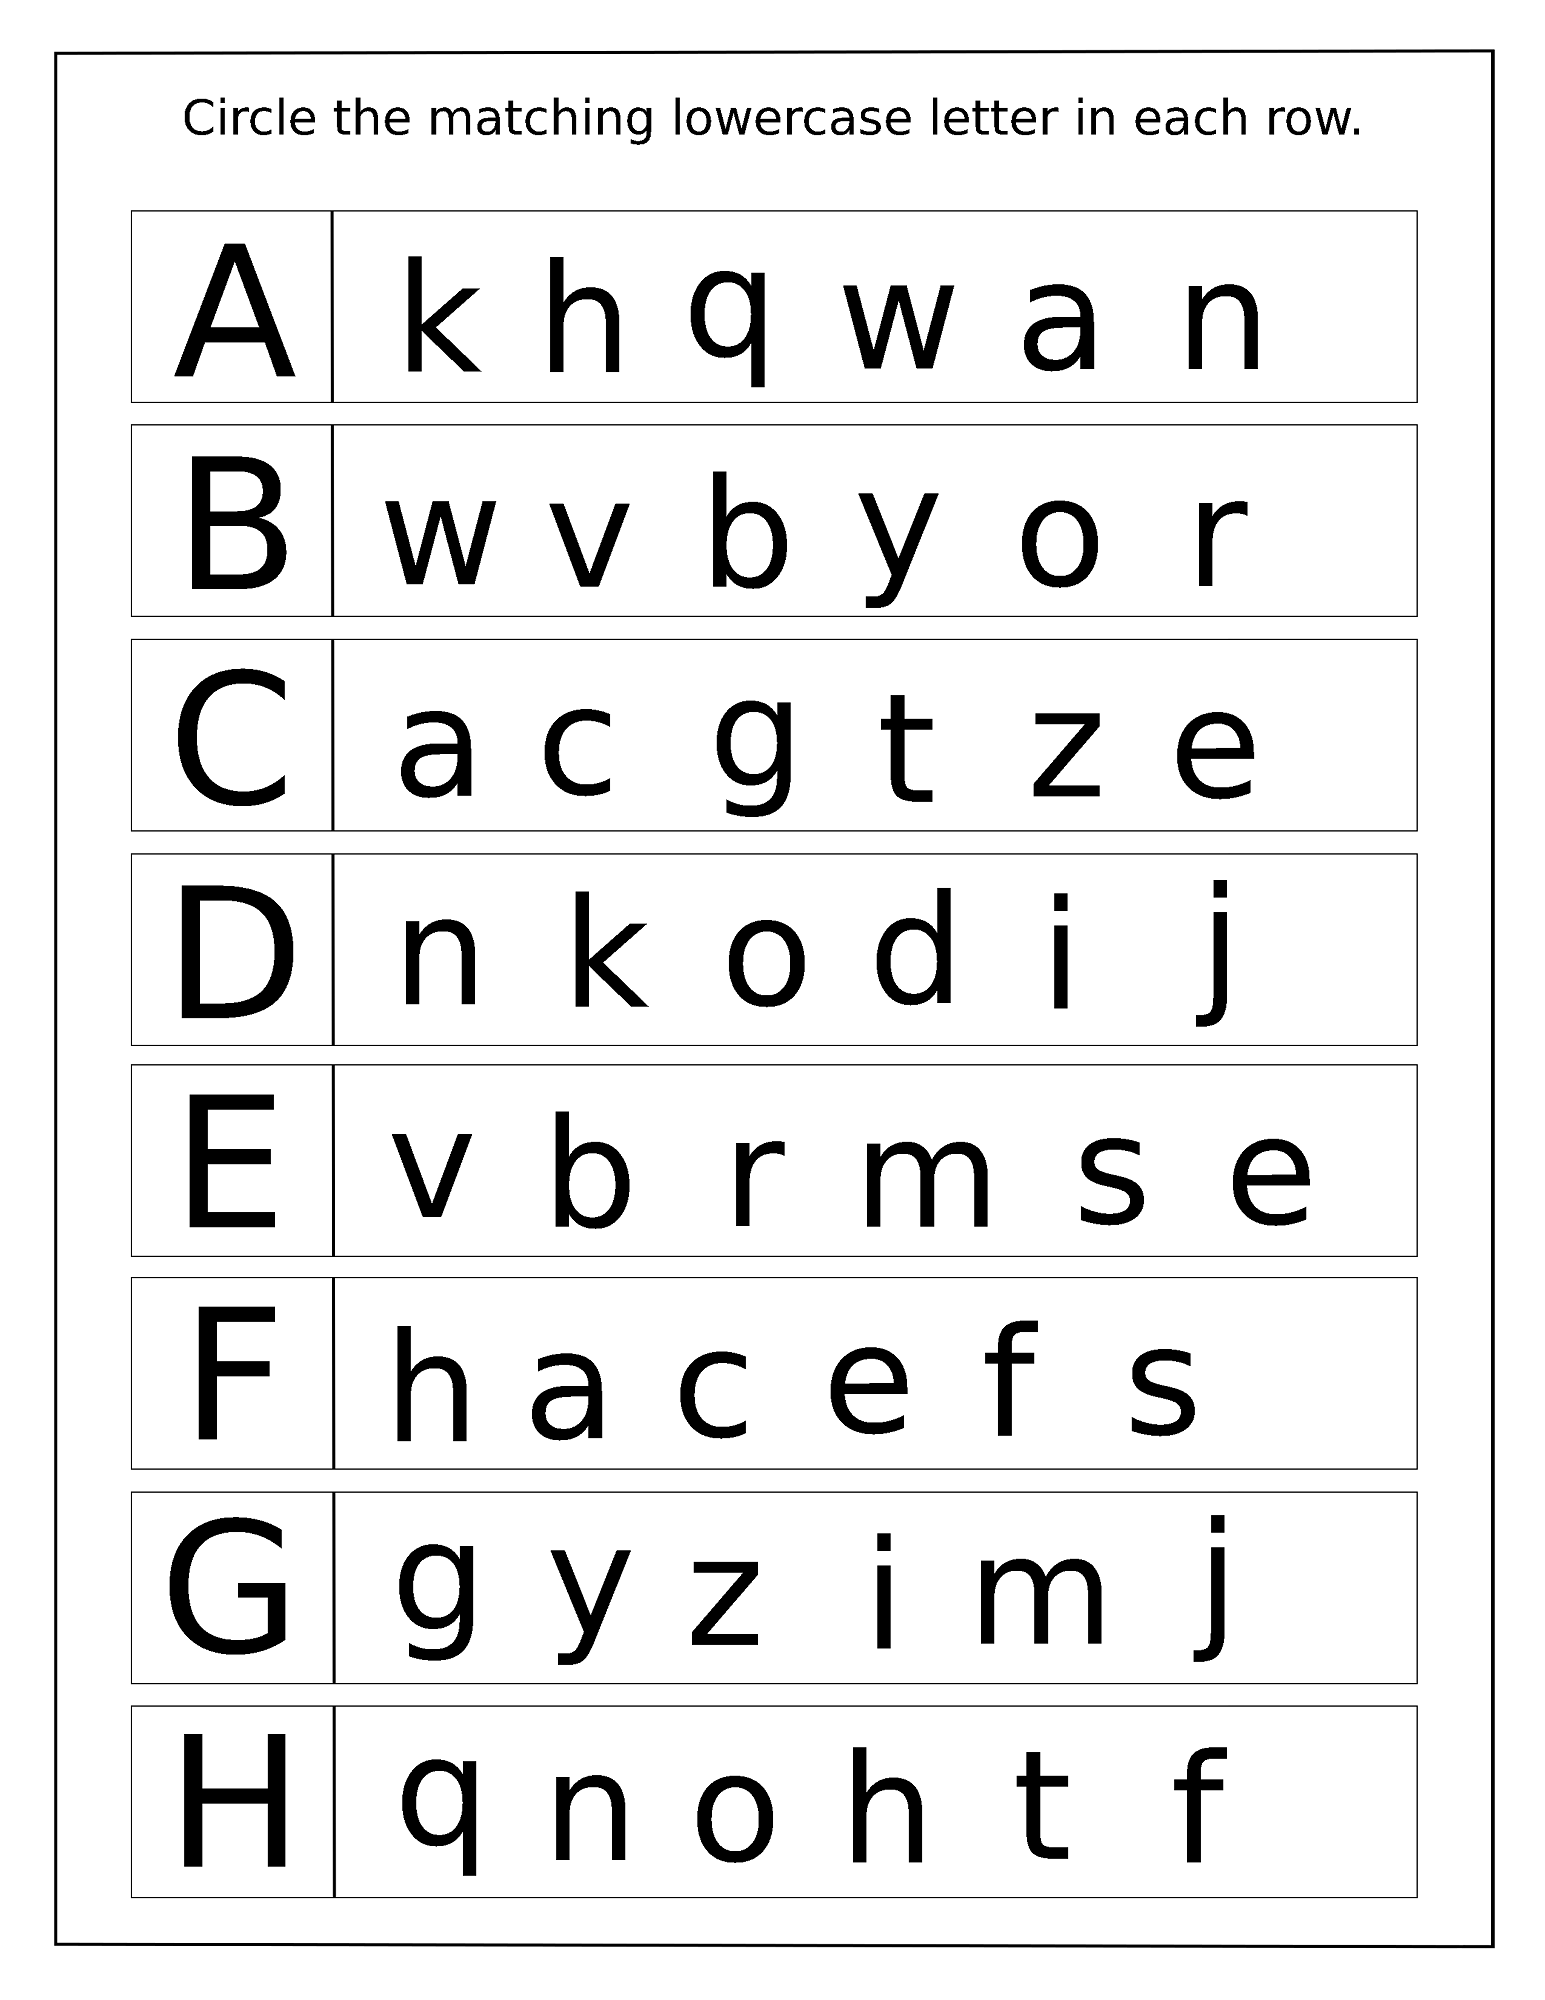 printable-upper-and-lower-case-letters-printable-word-searches